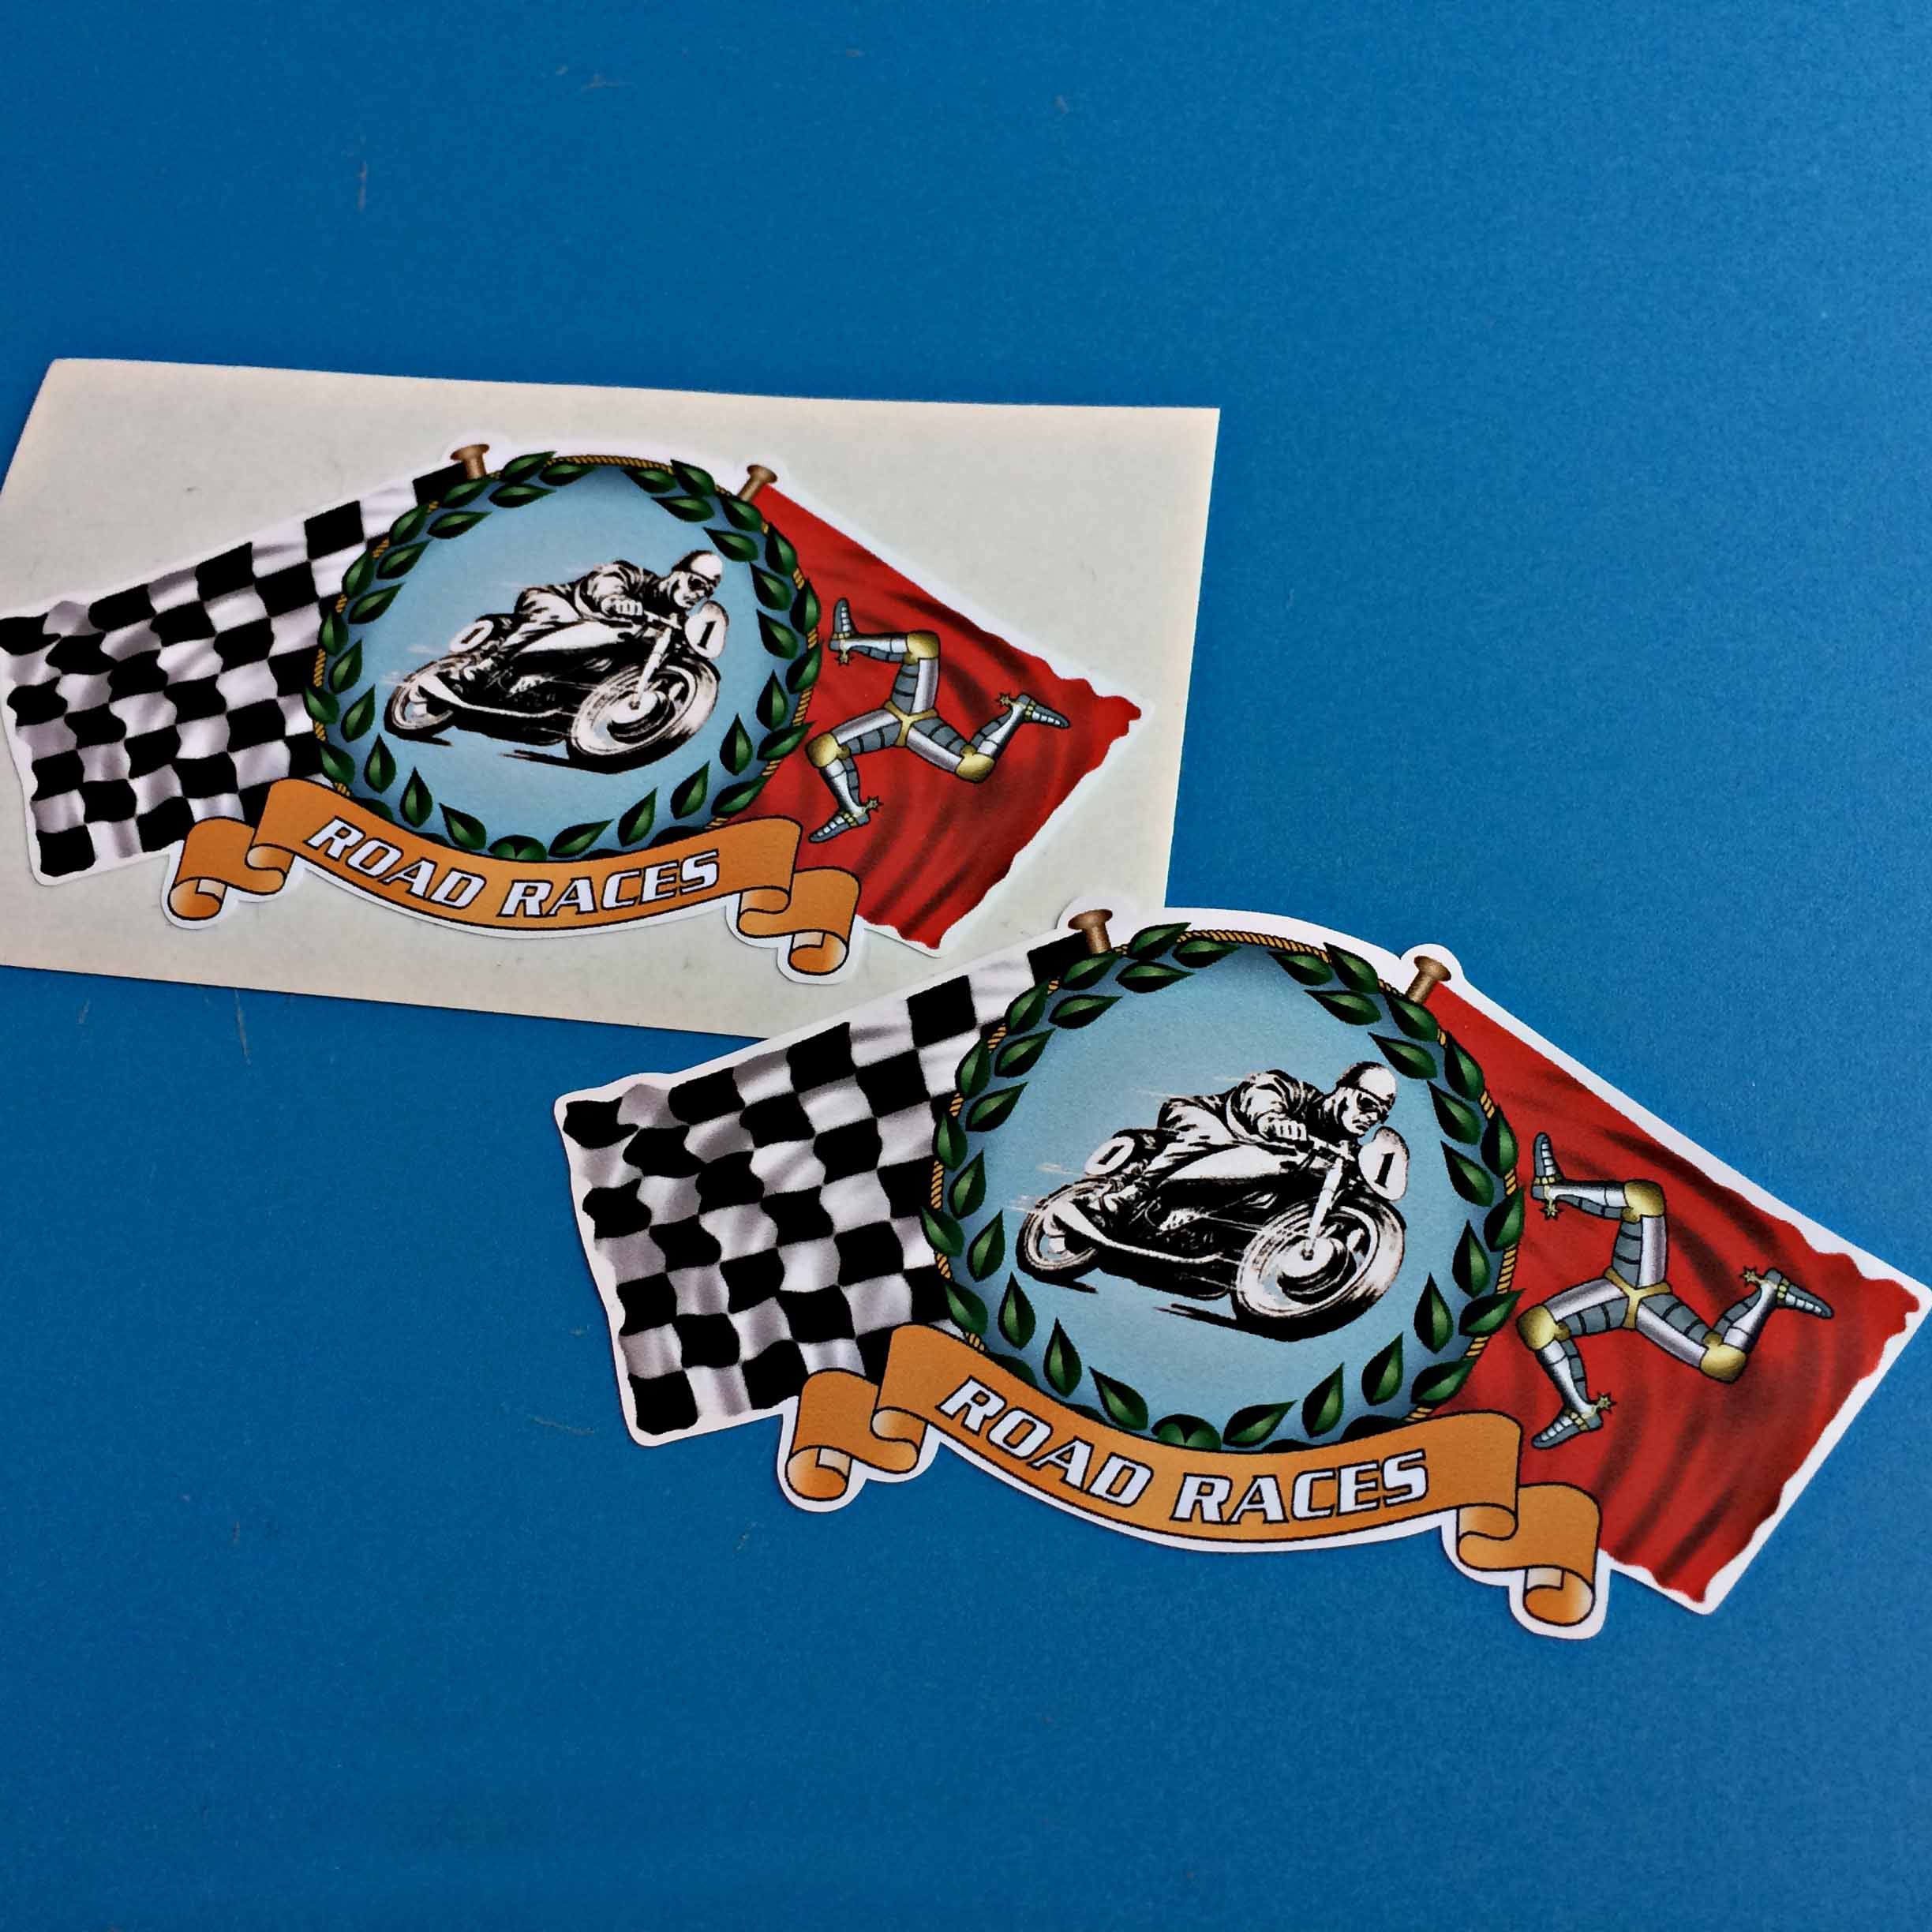 ISLE OF MAN CHEQUERED ROAD RACE STICKERS. Road Races in white lettering on a gold banner. Above is a man on a motorbike surrounded by a laurel wreath. Either side is a chequered flag and the Isle Of Man flag on poles.